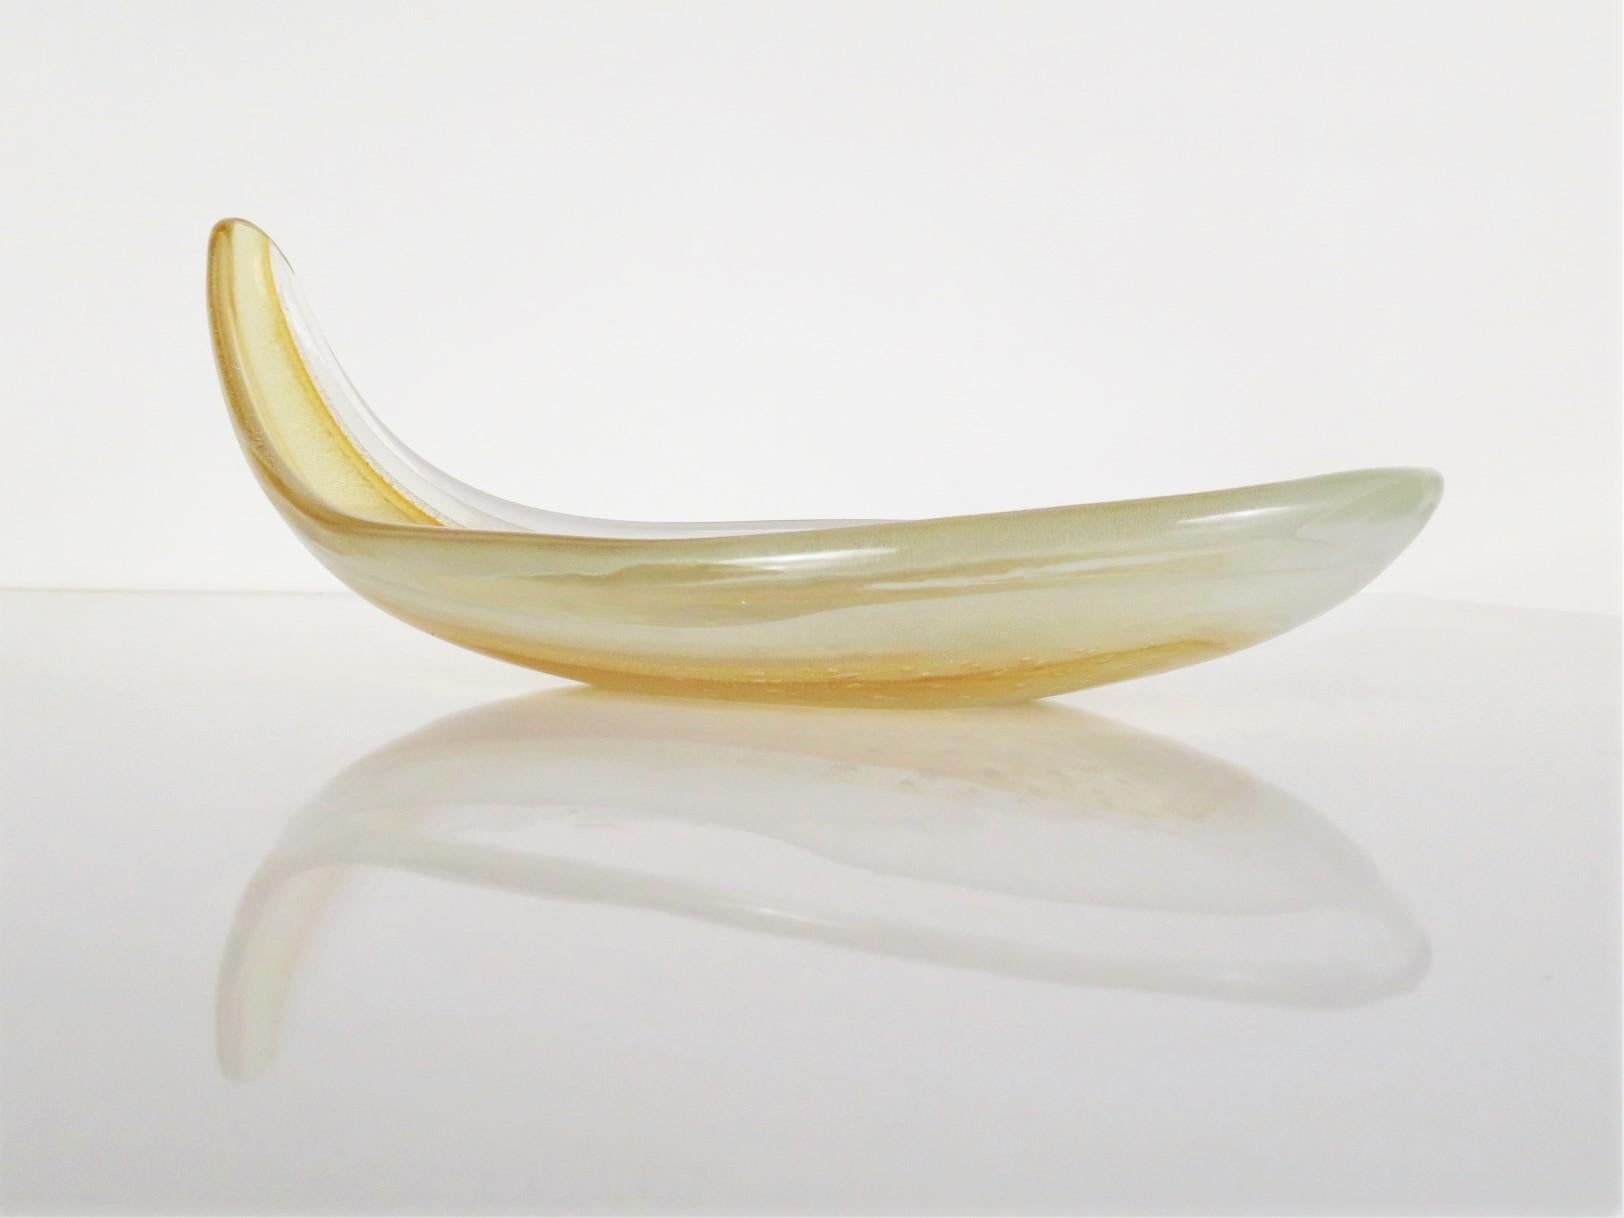 Lovely, elongated glass Murano shallow bowl in clear with infused gold by Seguso, Italy. Reminiscent of a very elegant summer squash with a handle.

Measurements: 12 inches wide x 5 3/4 inches wide x 5 inches high

Very Good Condition. The upper